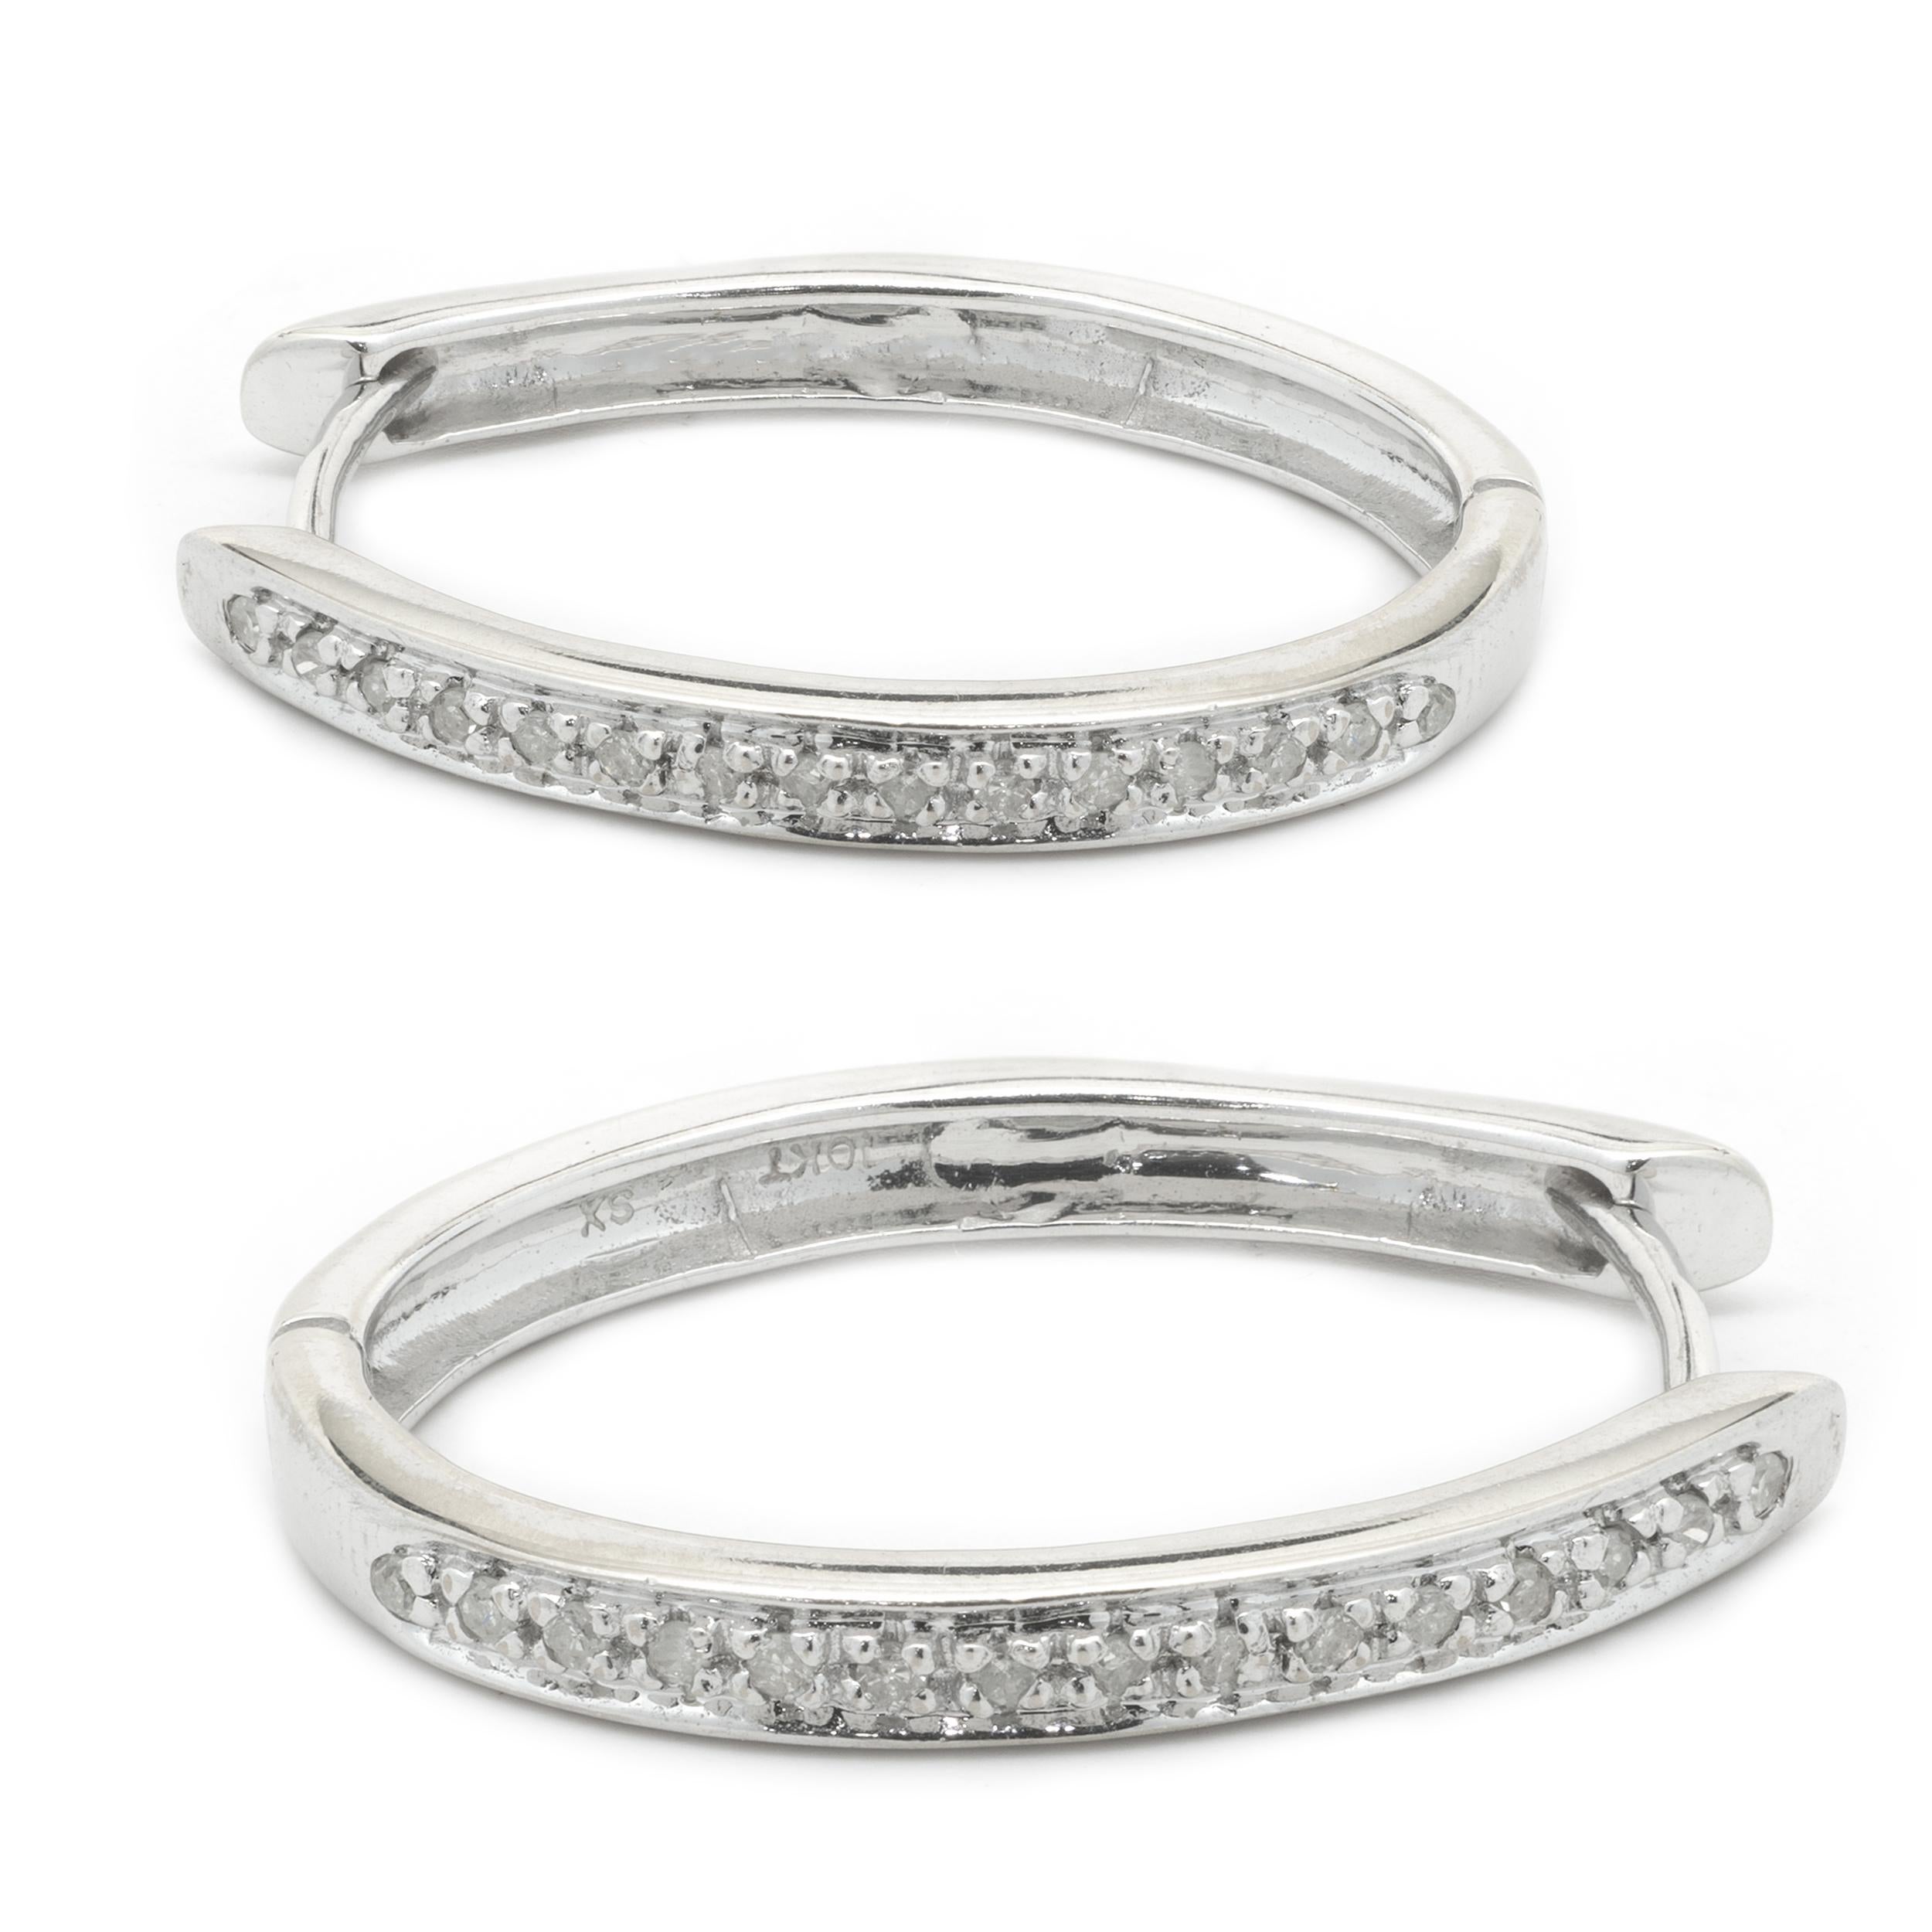 Designer: custom design
Material: 10k white gold
Diamonds: 28 round cut = 0.28cttw
Color: I
Clarity: I2
Dimensions: earrings measure 24.6 X 2.78mm 
Fastenings: snapbacks
Weight: 4.60 grams
